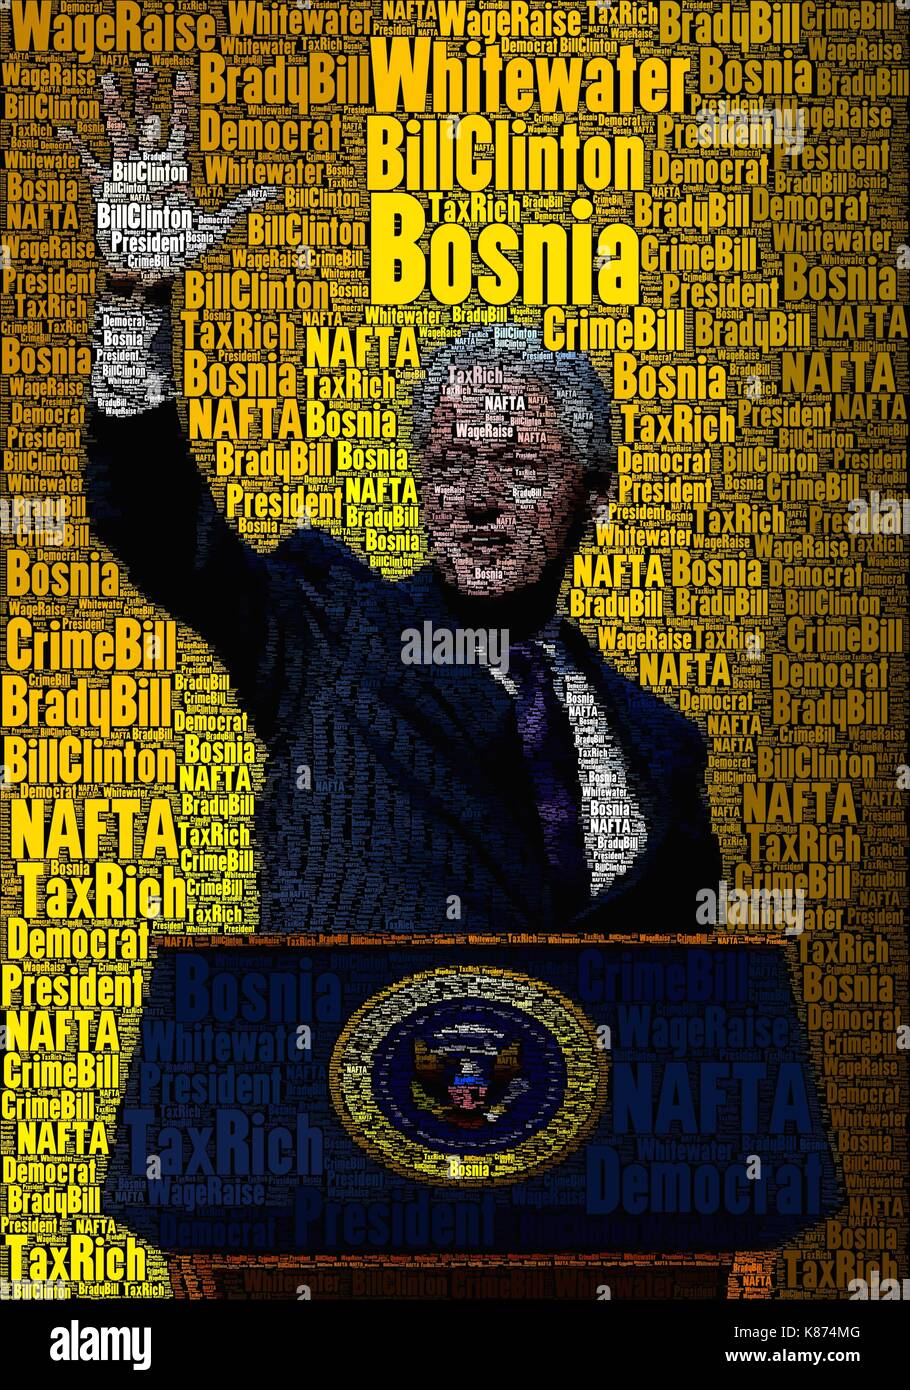 President Bill Clinton art concept cover, using only words about his time in office. Stock Photo